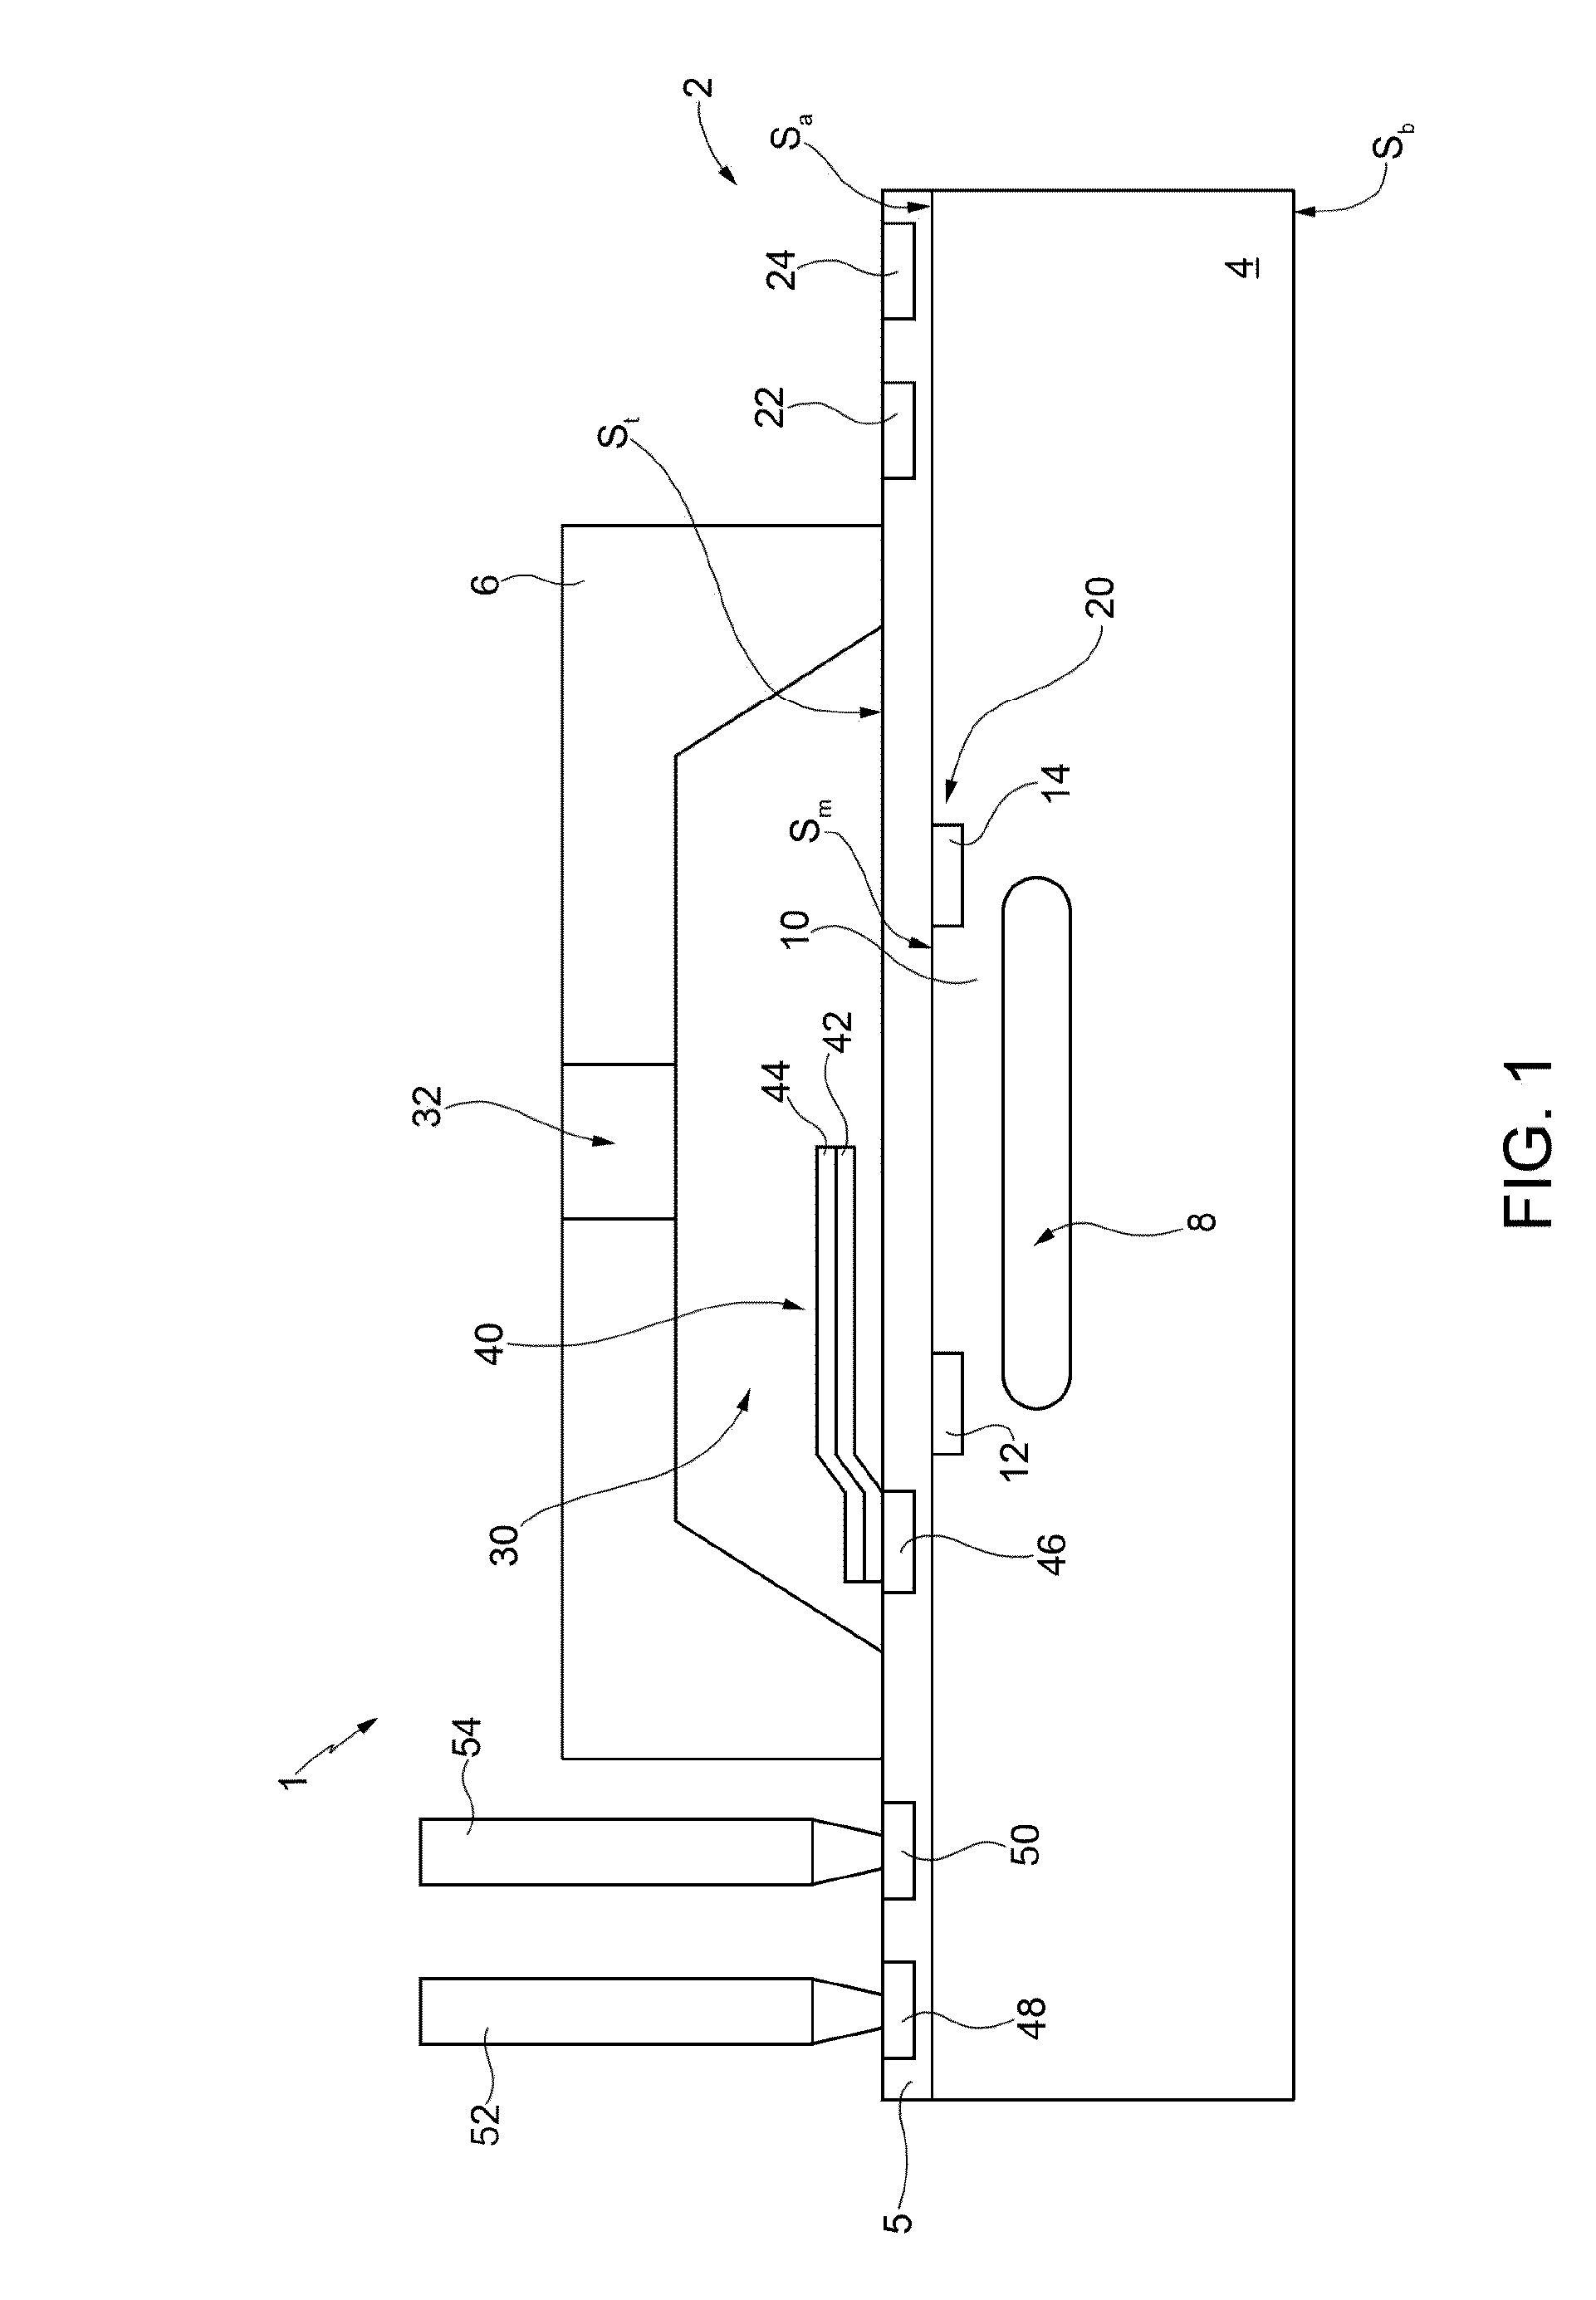 Microelectromechanical sensing structure for a pressure sensor including a deformable test structure